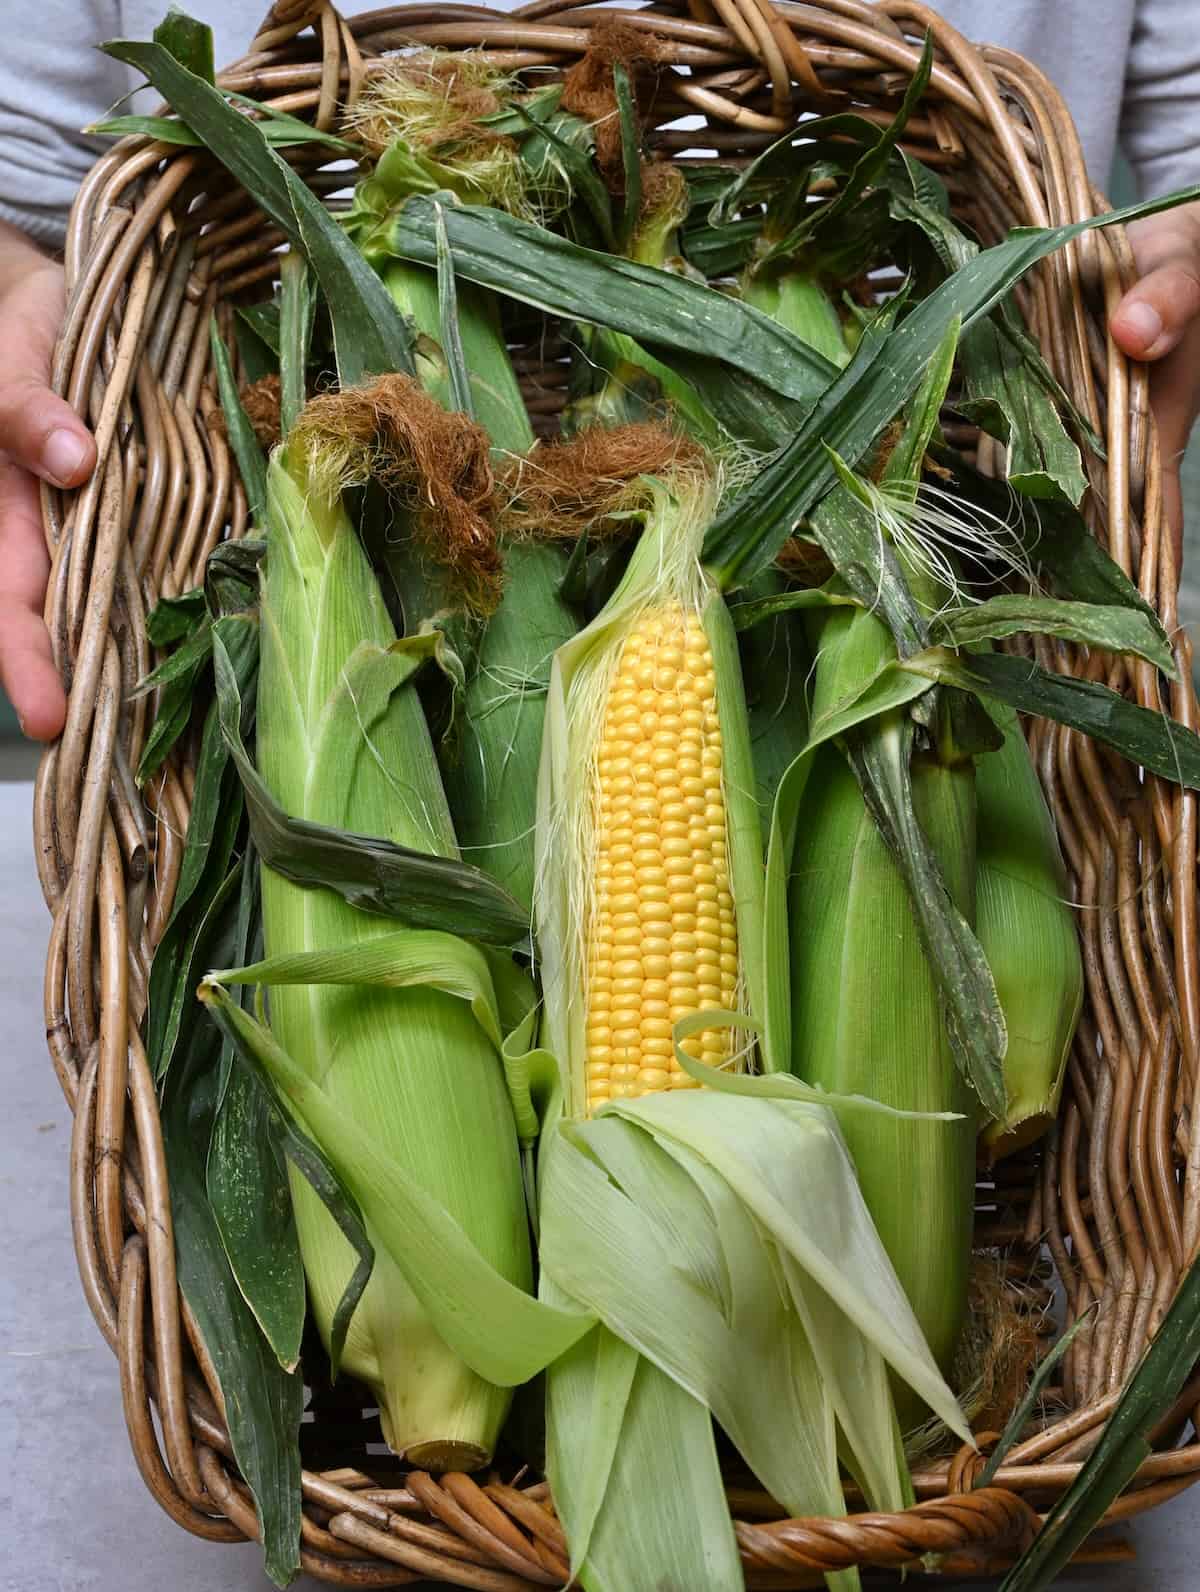 Corn on the cob in their husks in a basket